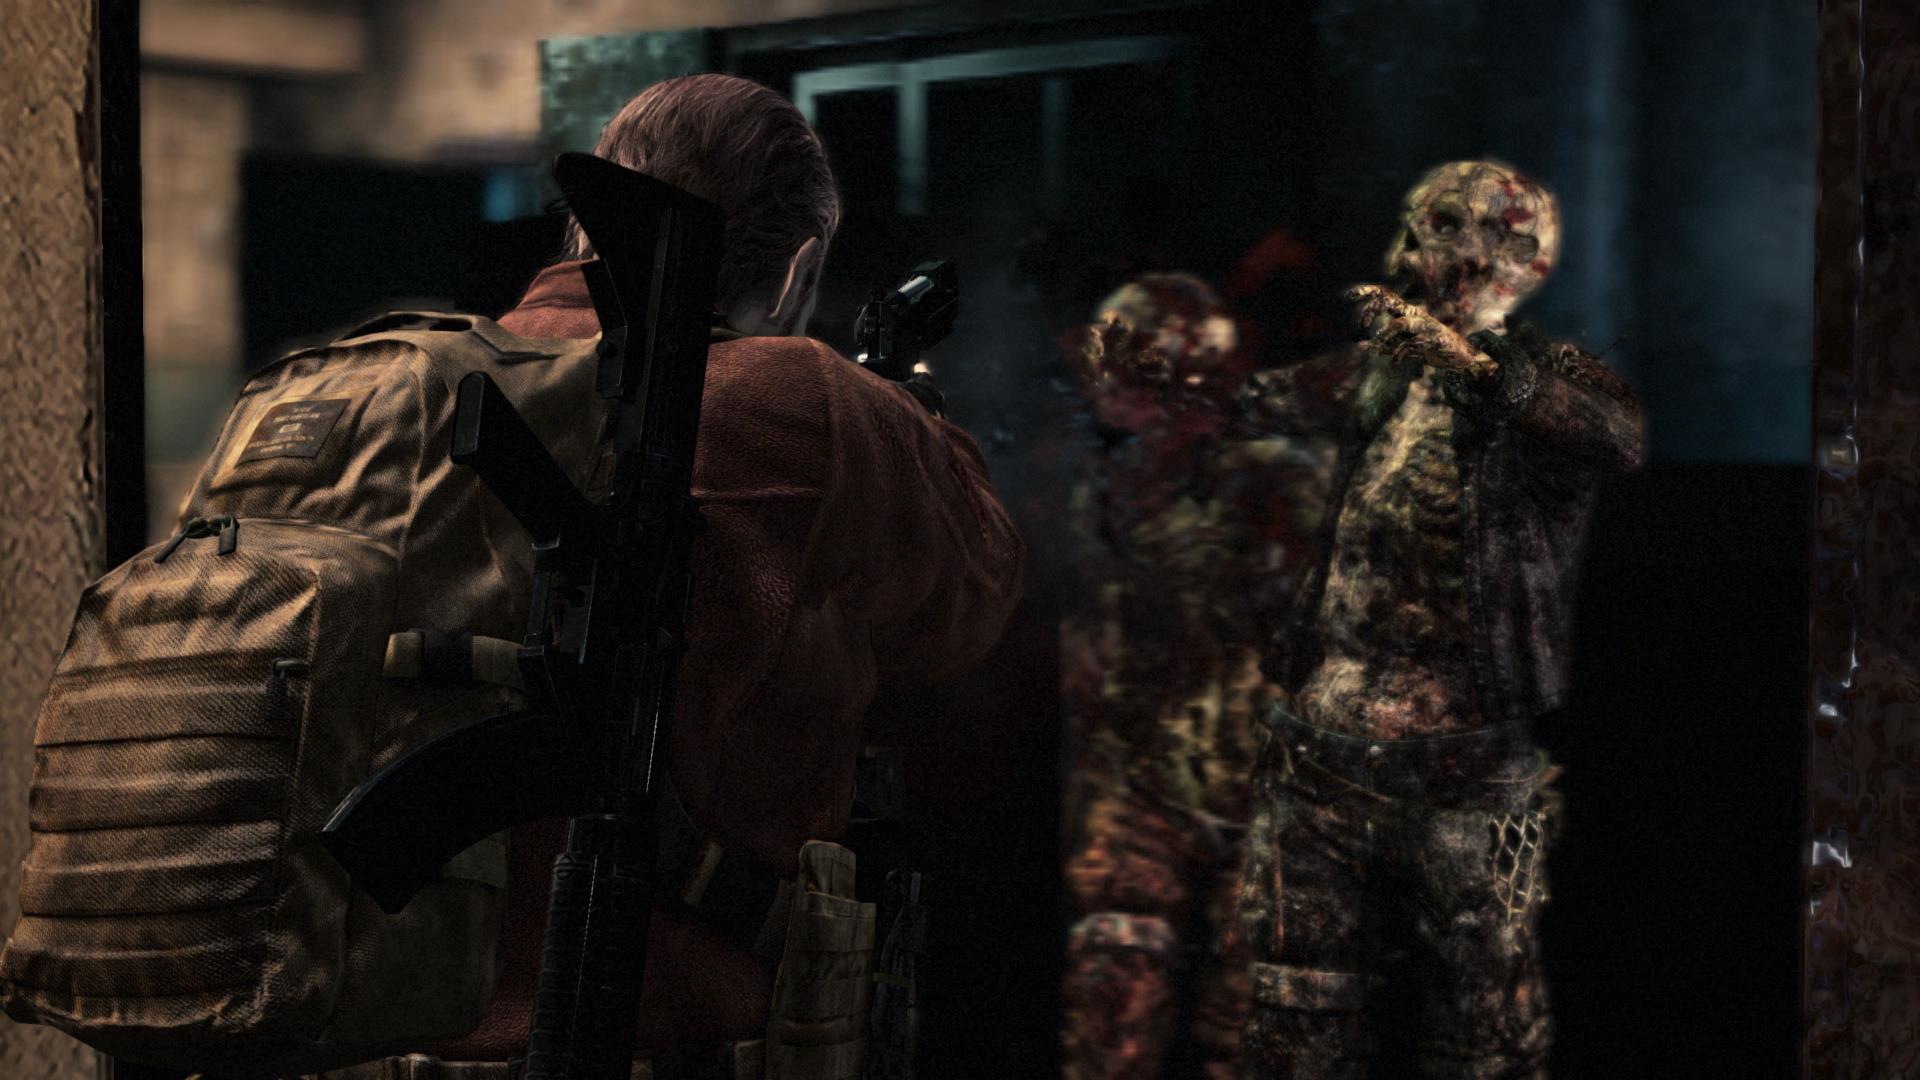 Image for PC version of Resident Evil: Revelations 2 does not support offline co-op [Update]